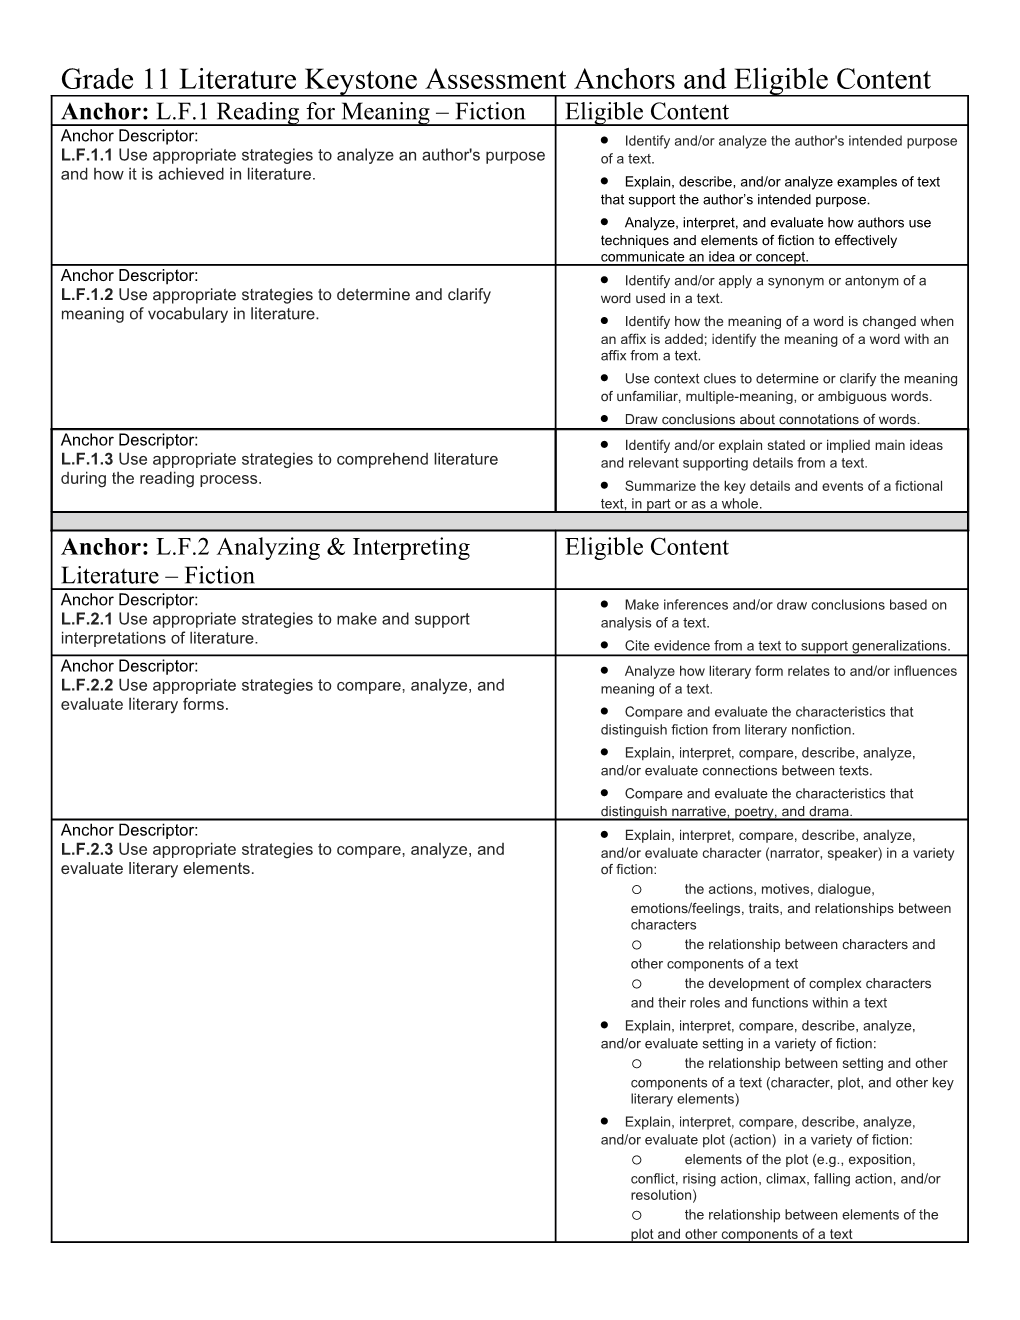 Grade 11Literature Keystone Assessment Anchors and Eligible Content